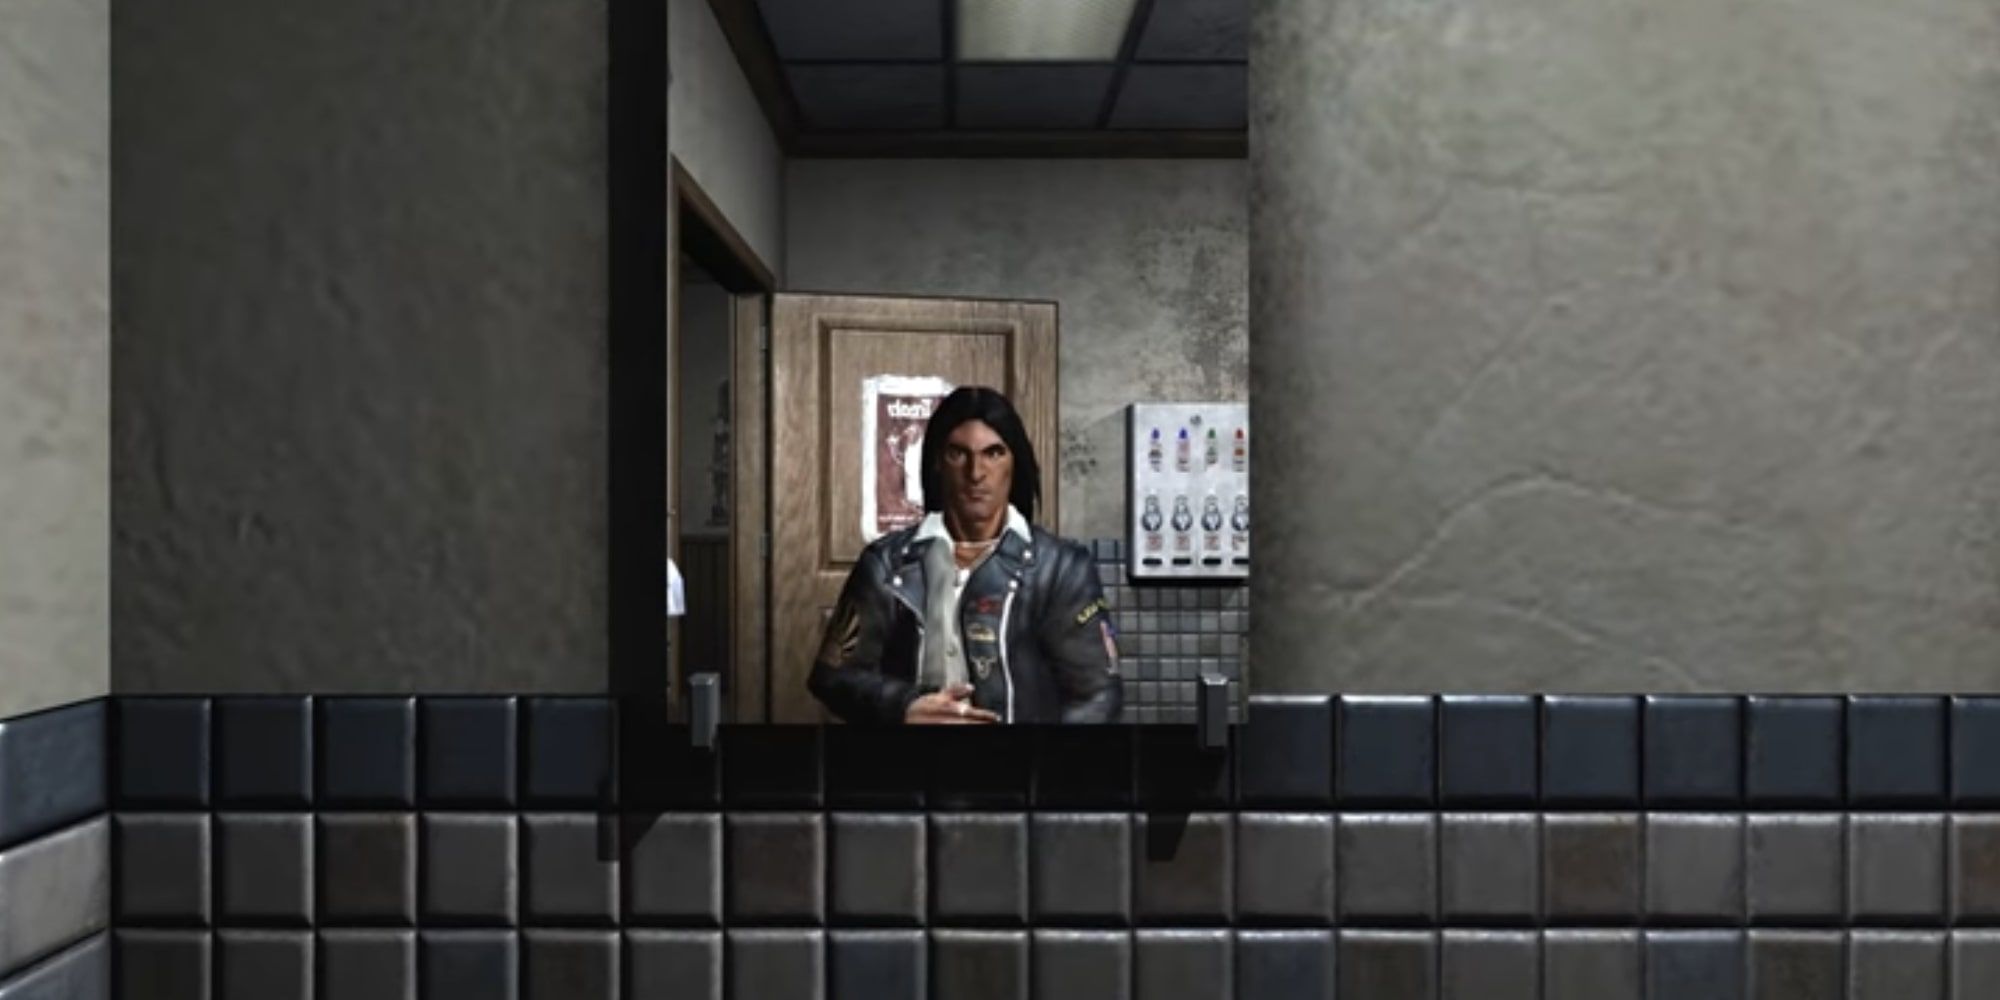 Prey protagonist Tommy Tawodi looking at his reflection in the bathroom mirror